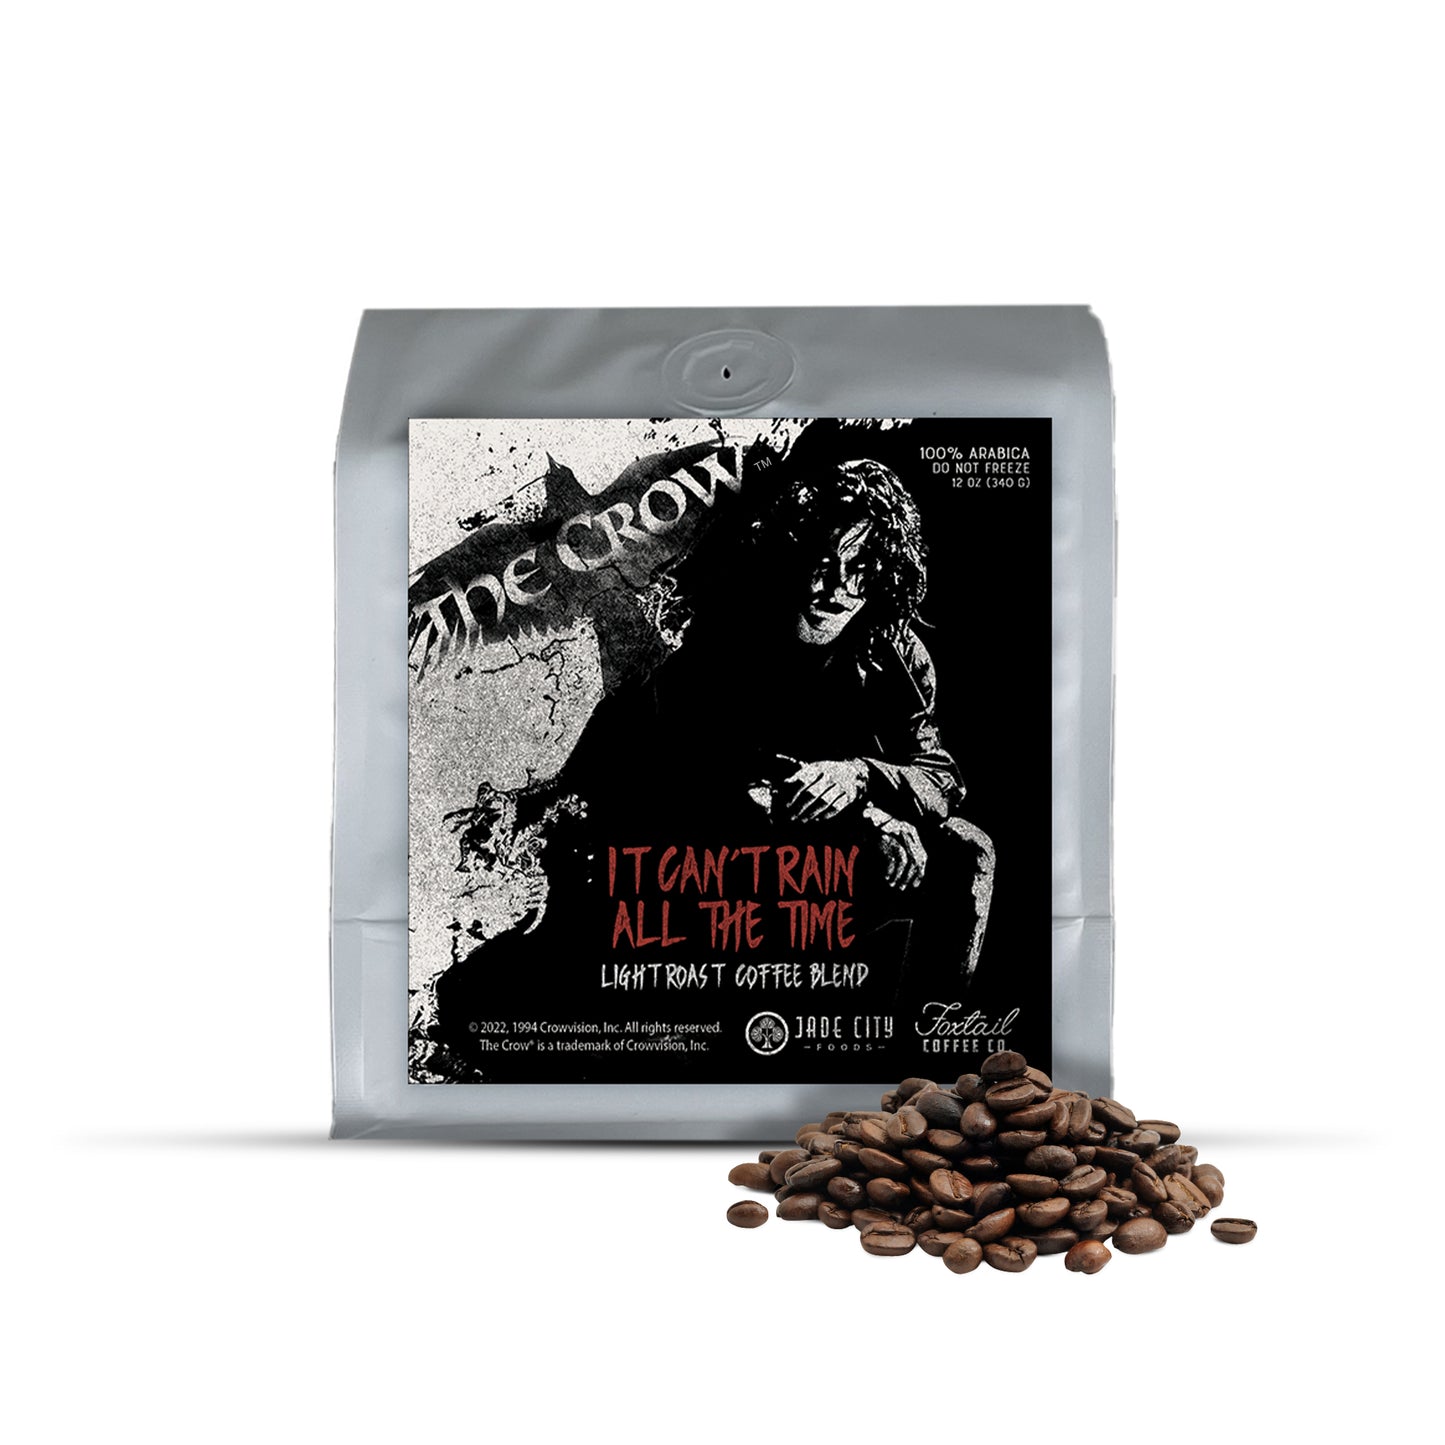 THE CROW™ It Can't Rain All The Time (Light Roast) 12oz